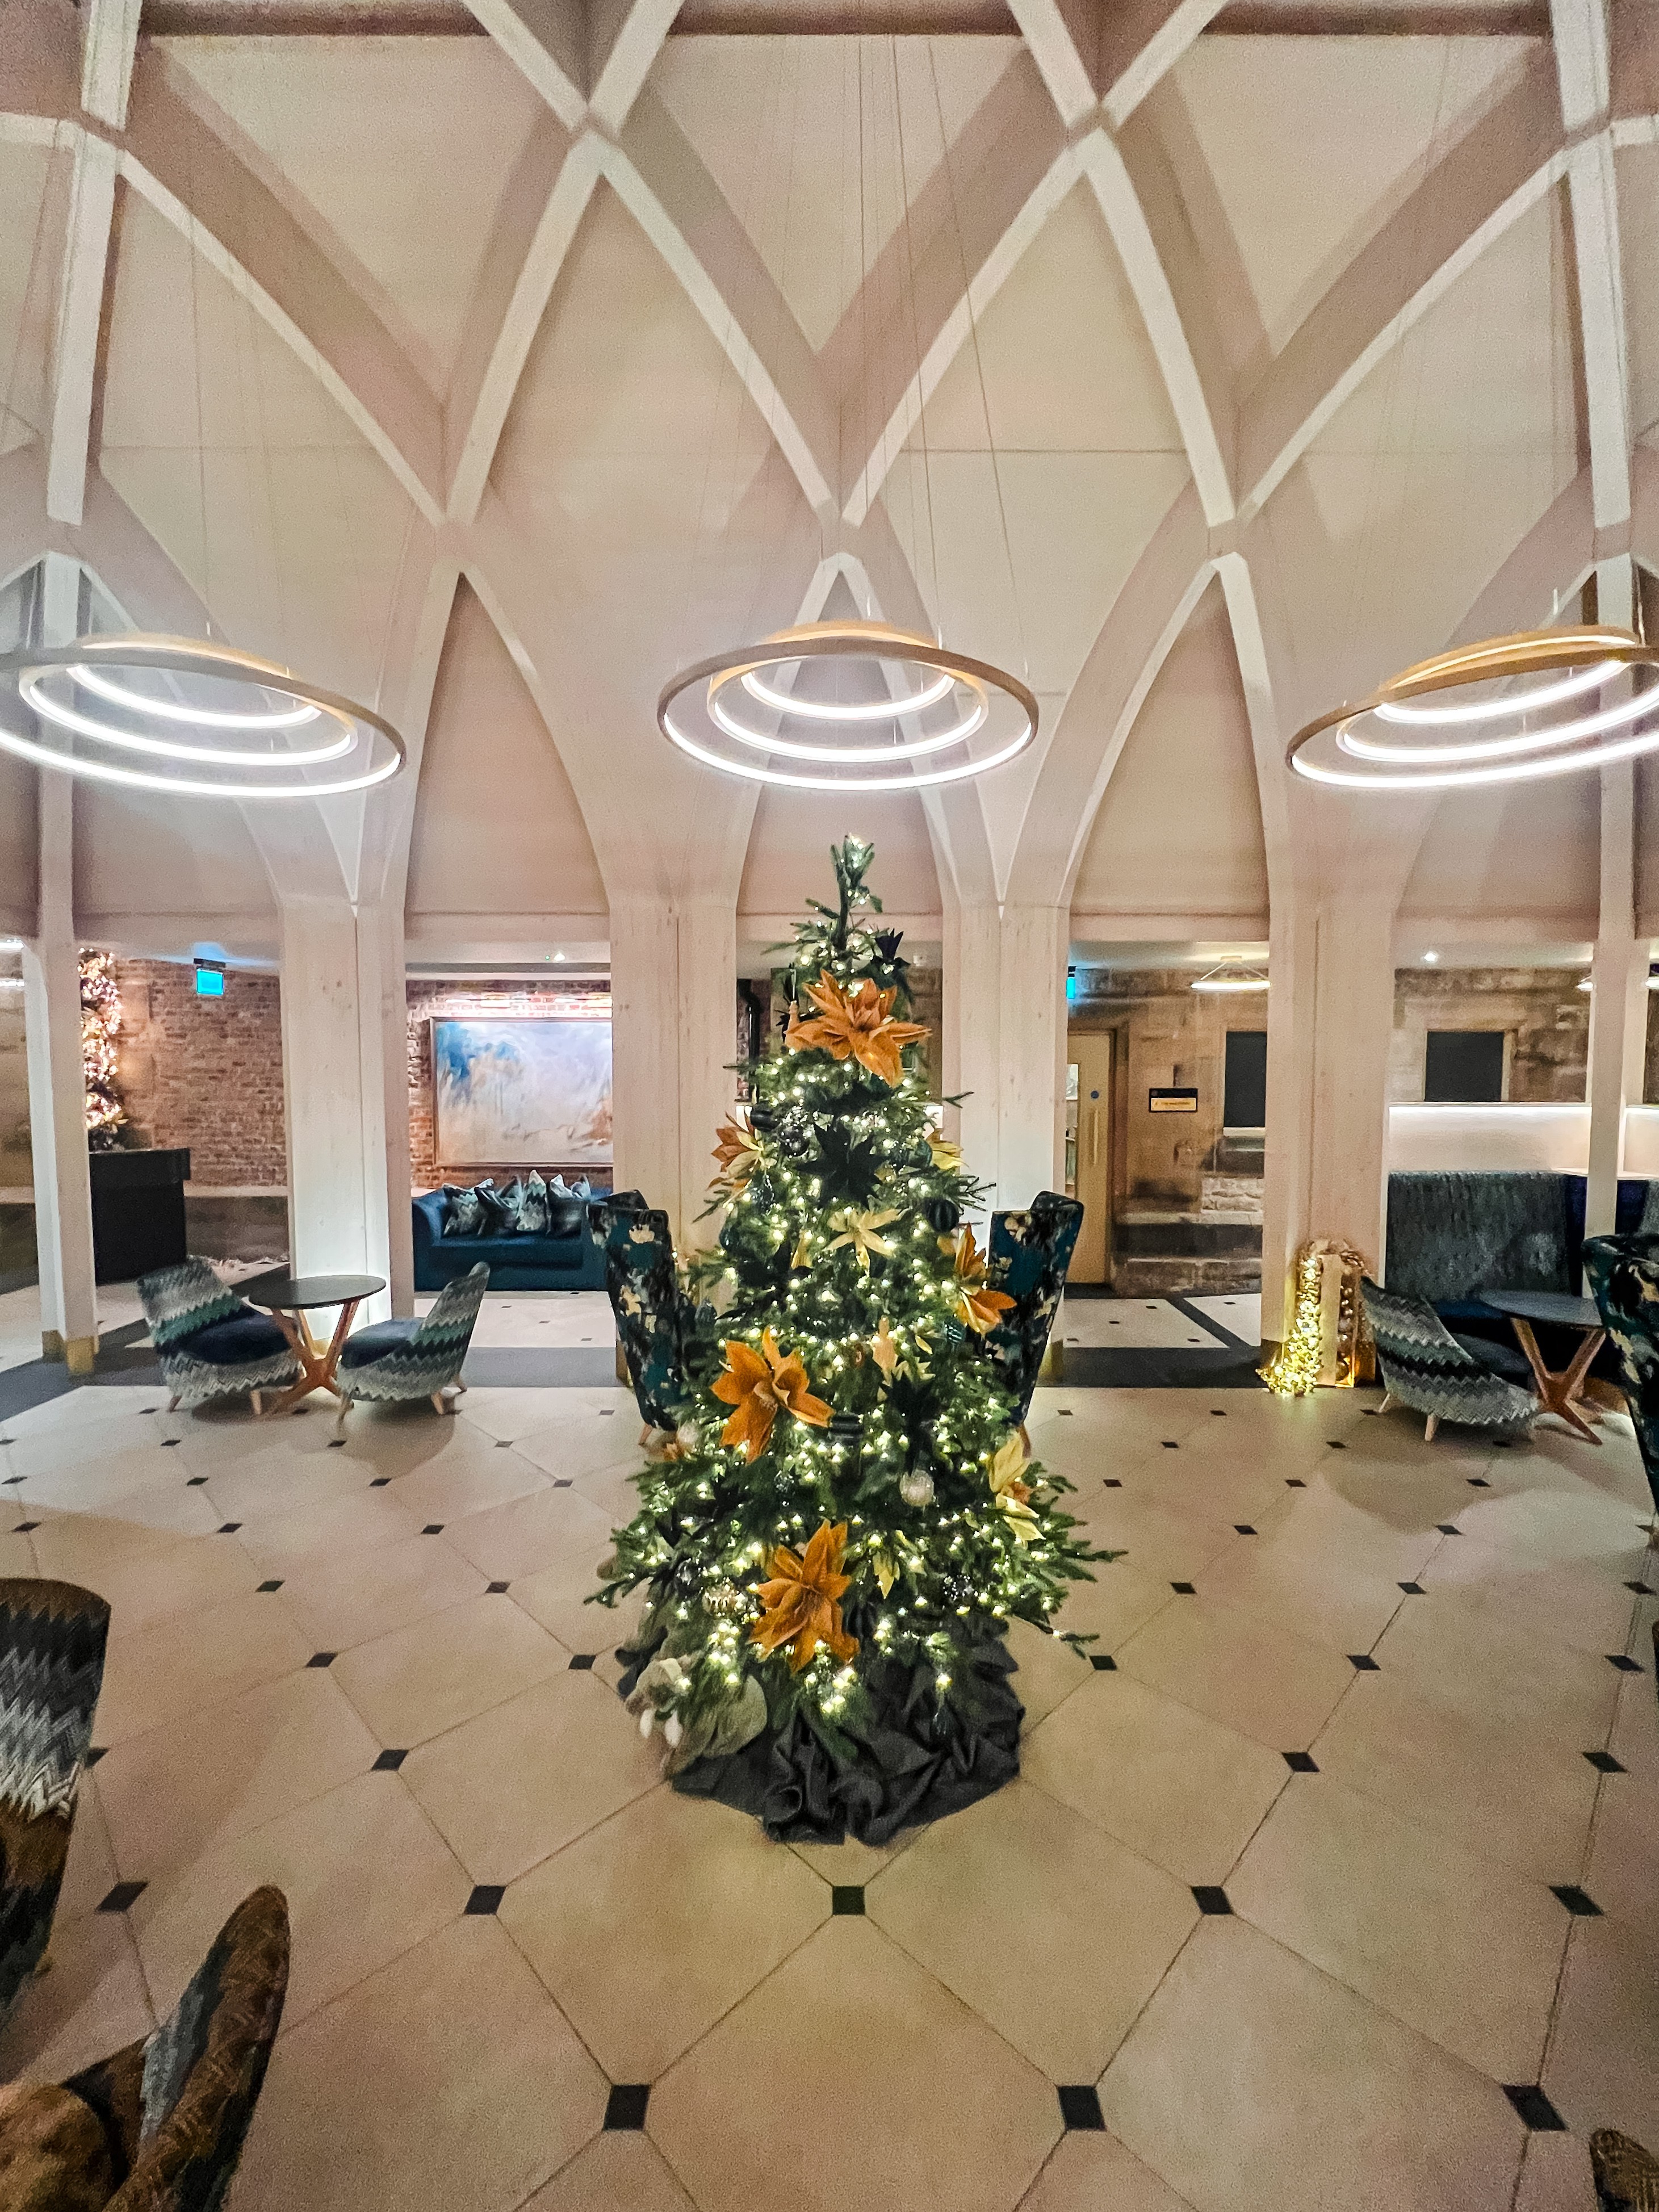 Matfen hall interiors decorated for Christmas